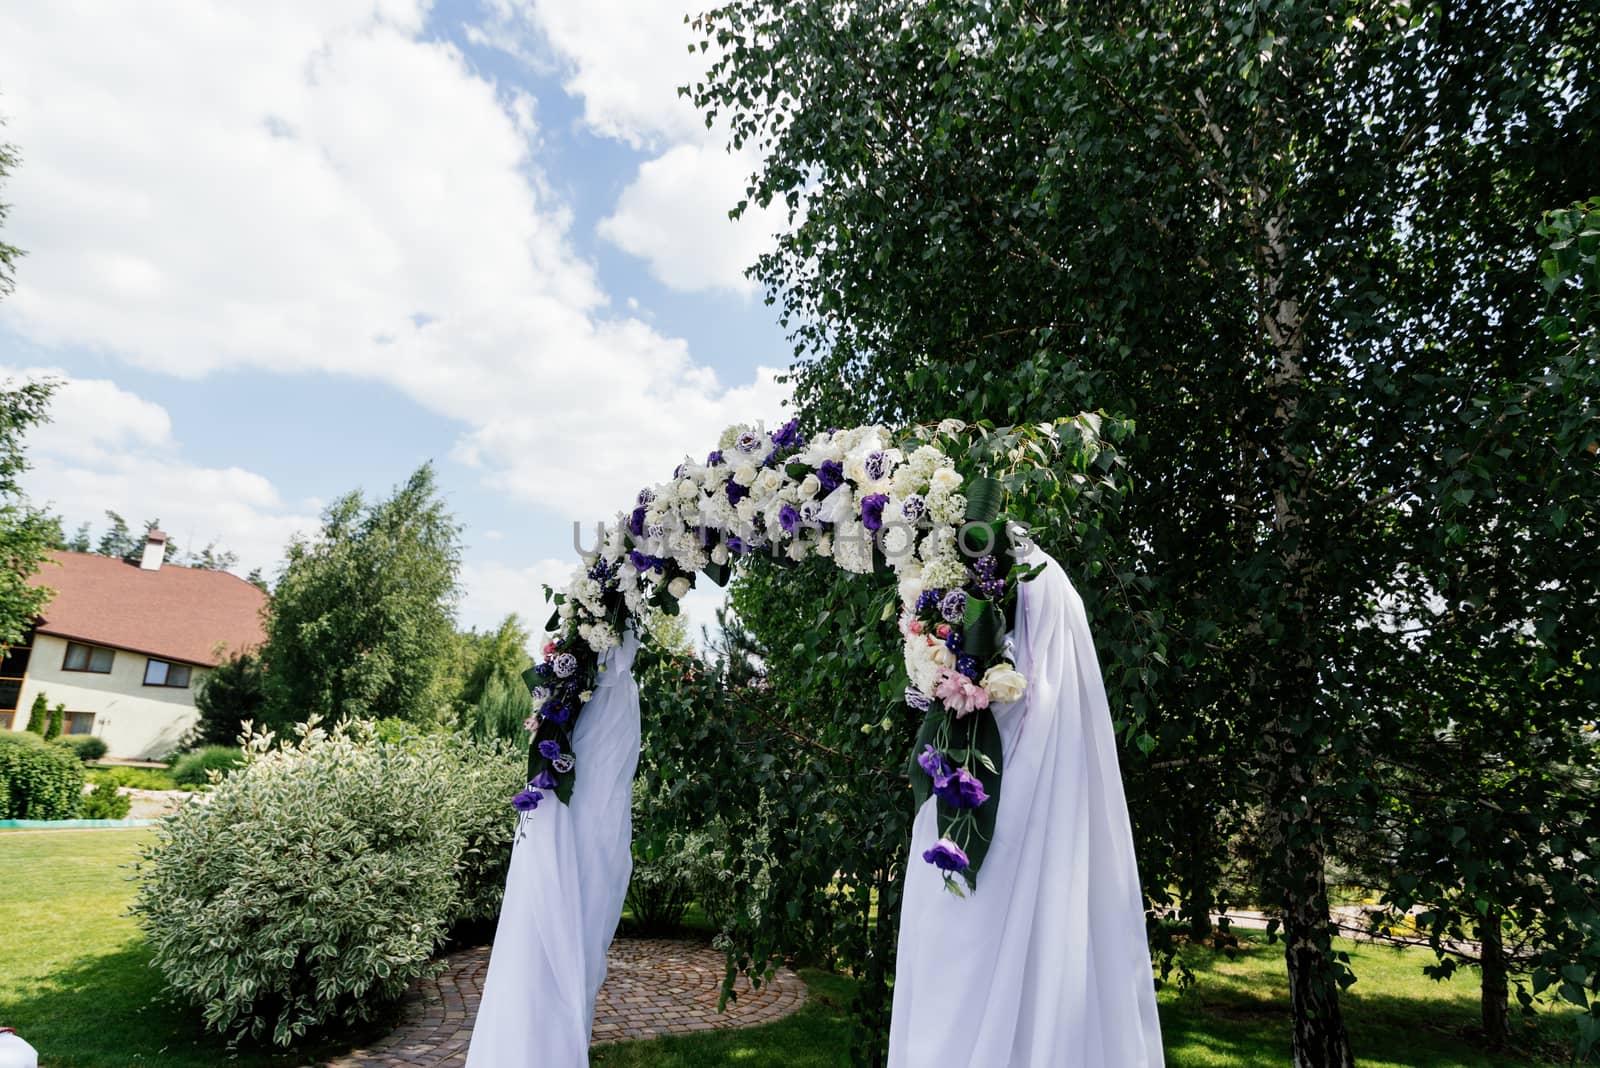 Wedding arch with flowers and white cloth near the birch